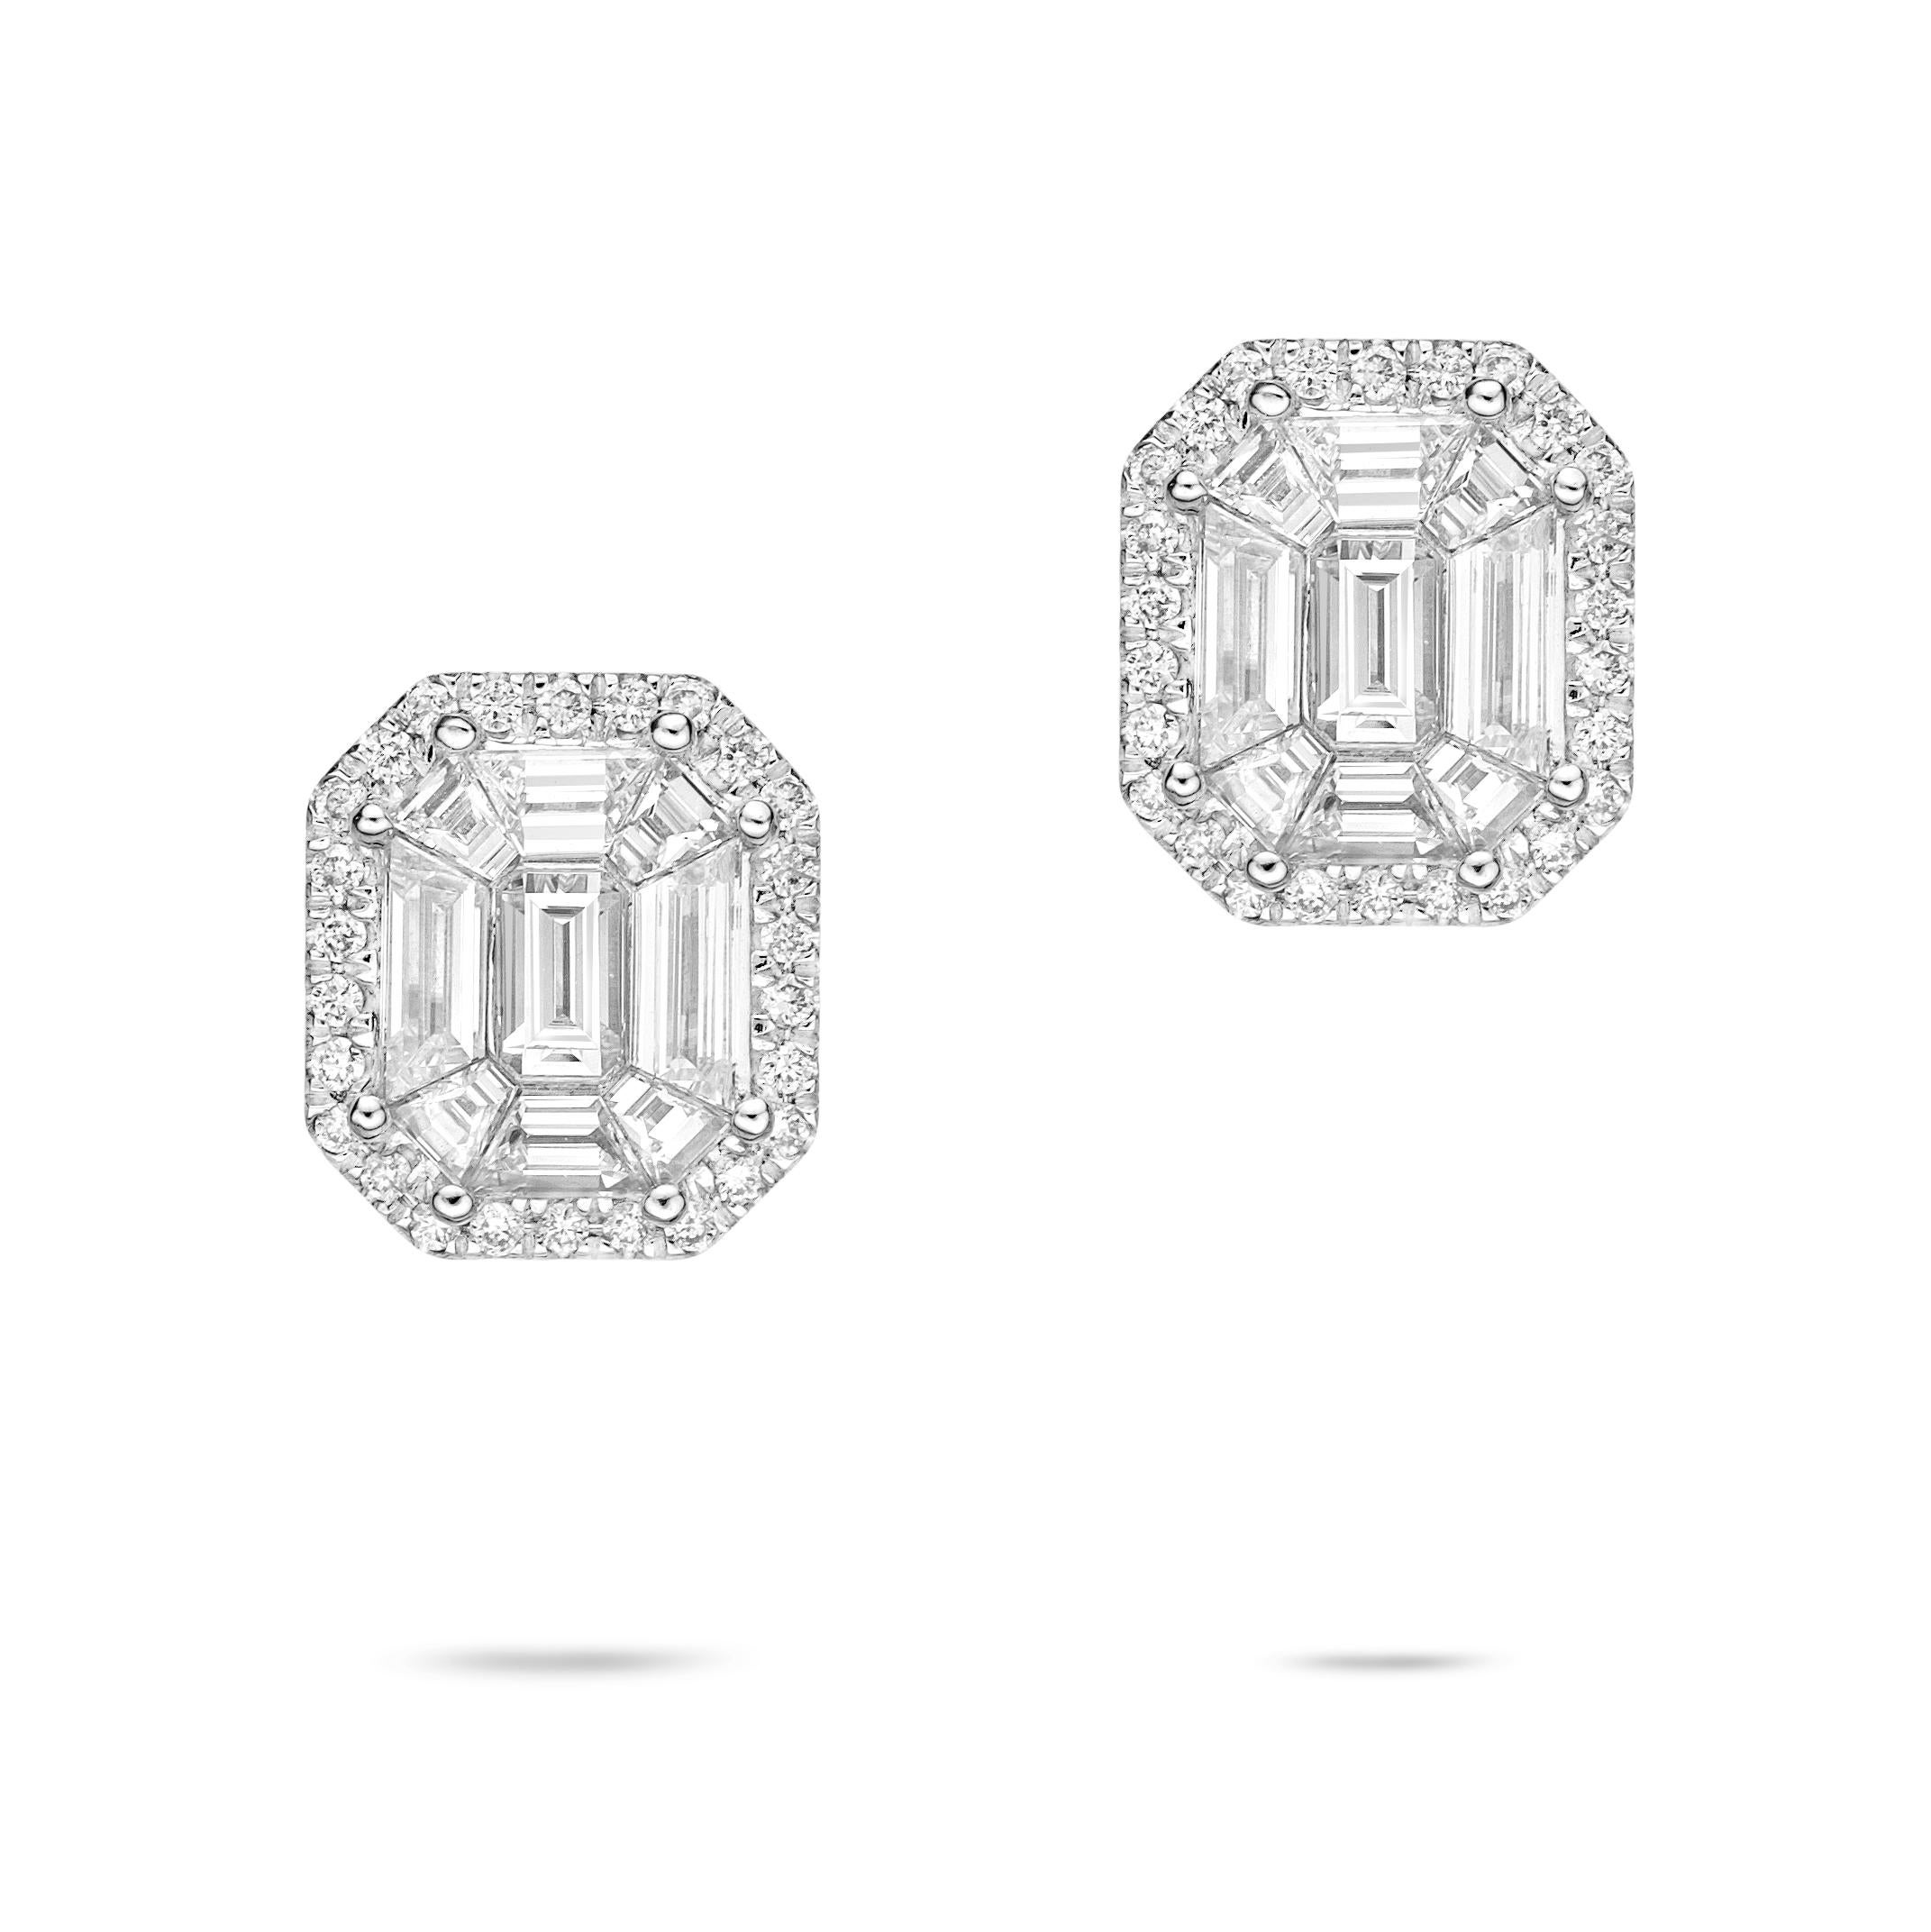 Symbols of purity and eternity, diamonds underline the precious beauty of this collection. The diamonds selected were of different cuts, each of which met the criteria.

The earring setting as 1.93 carat, made in 18K white gold.
